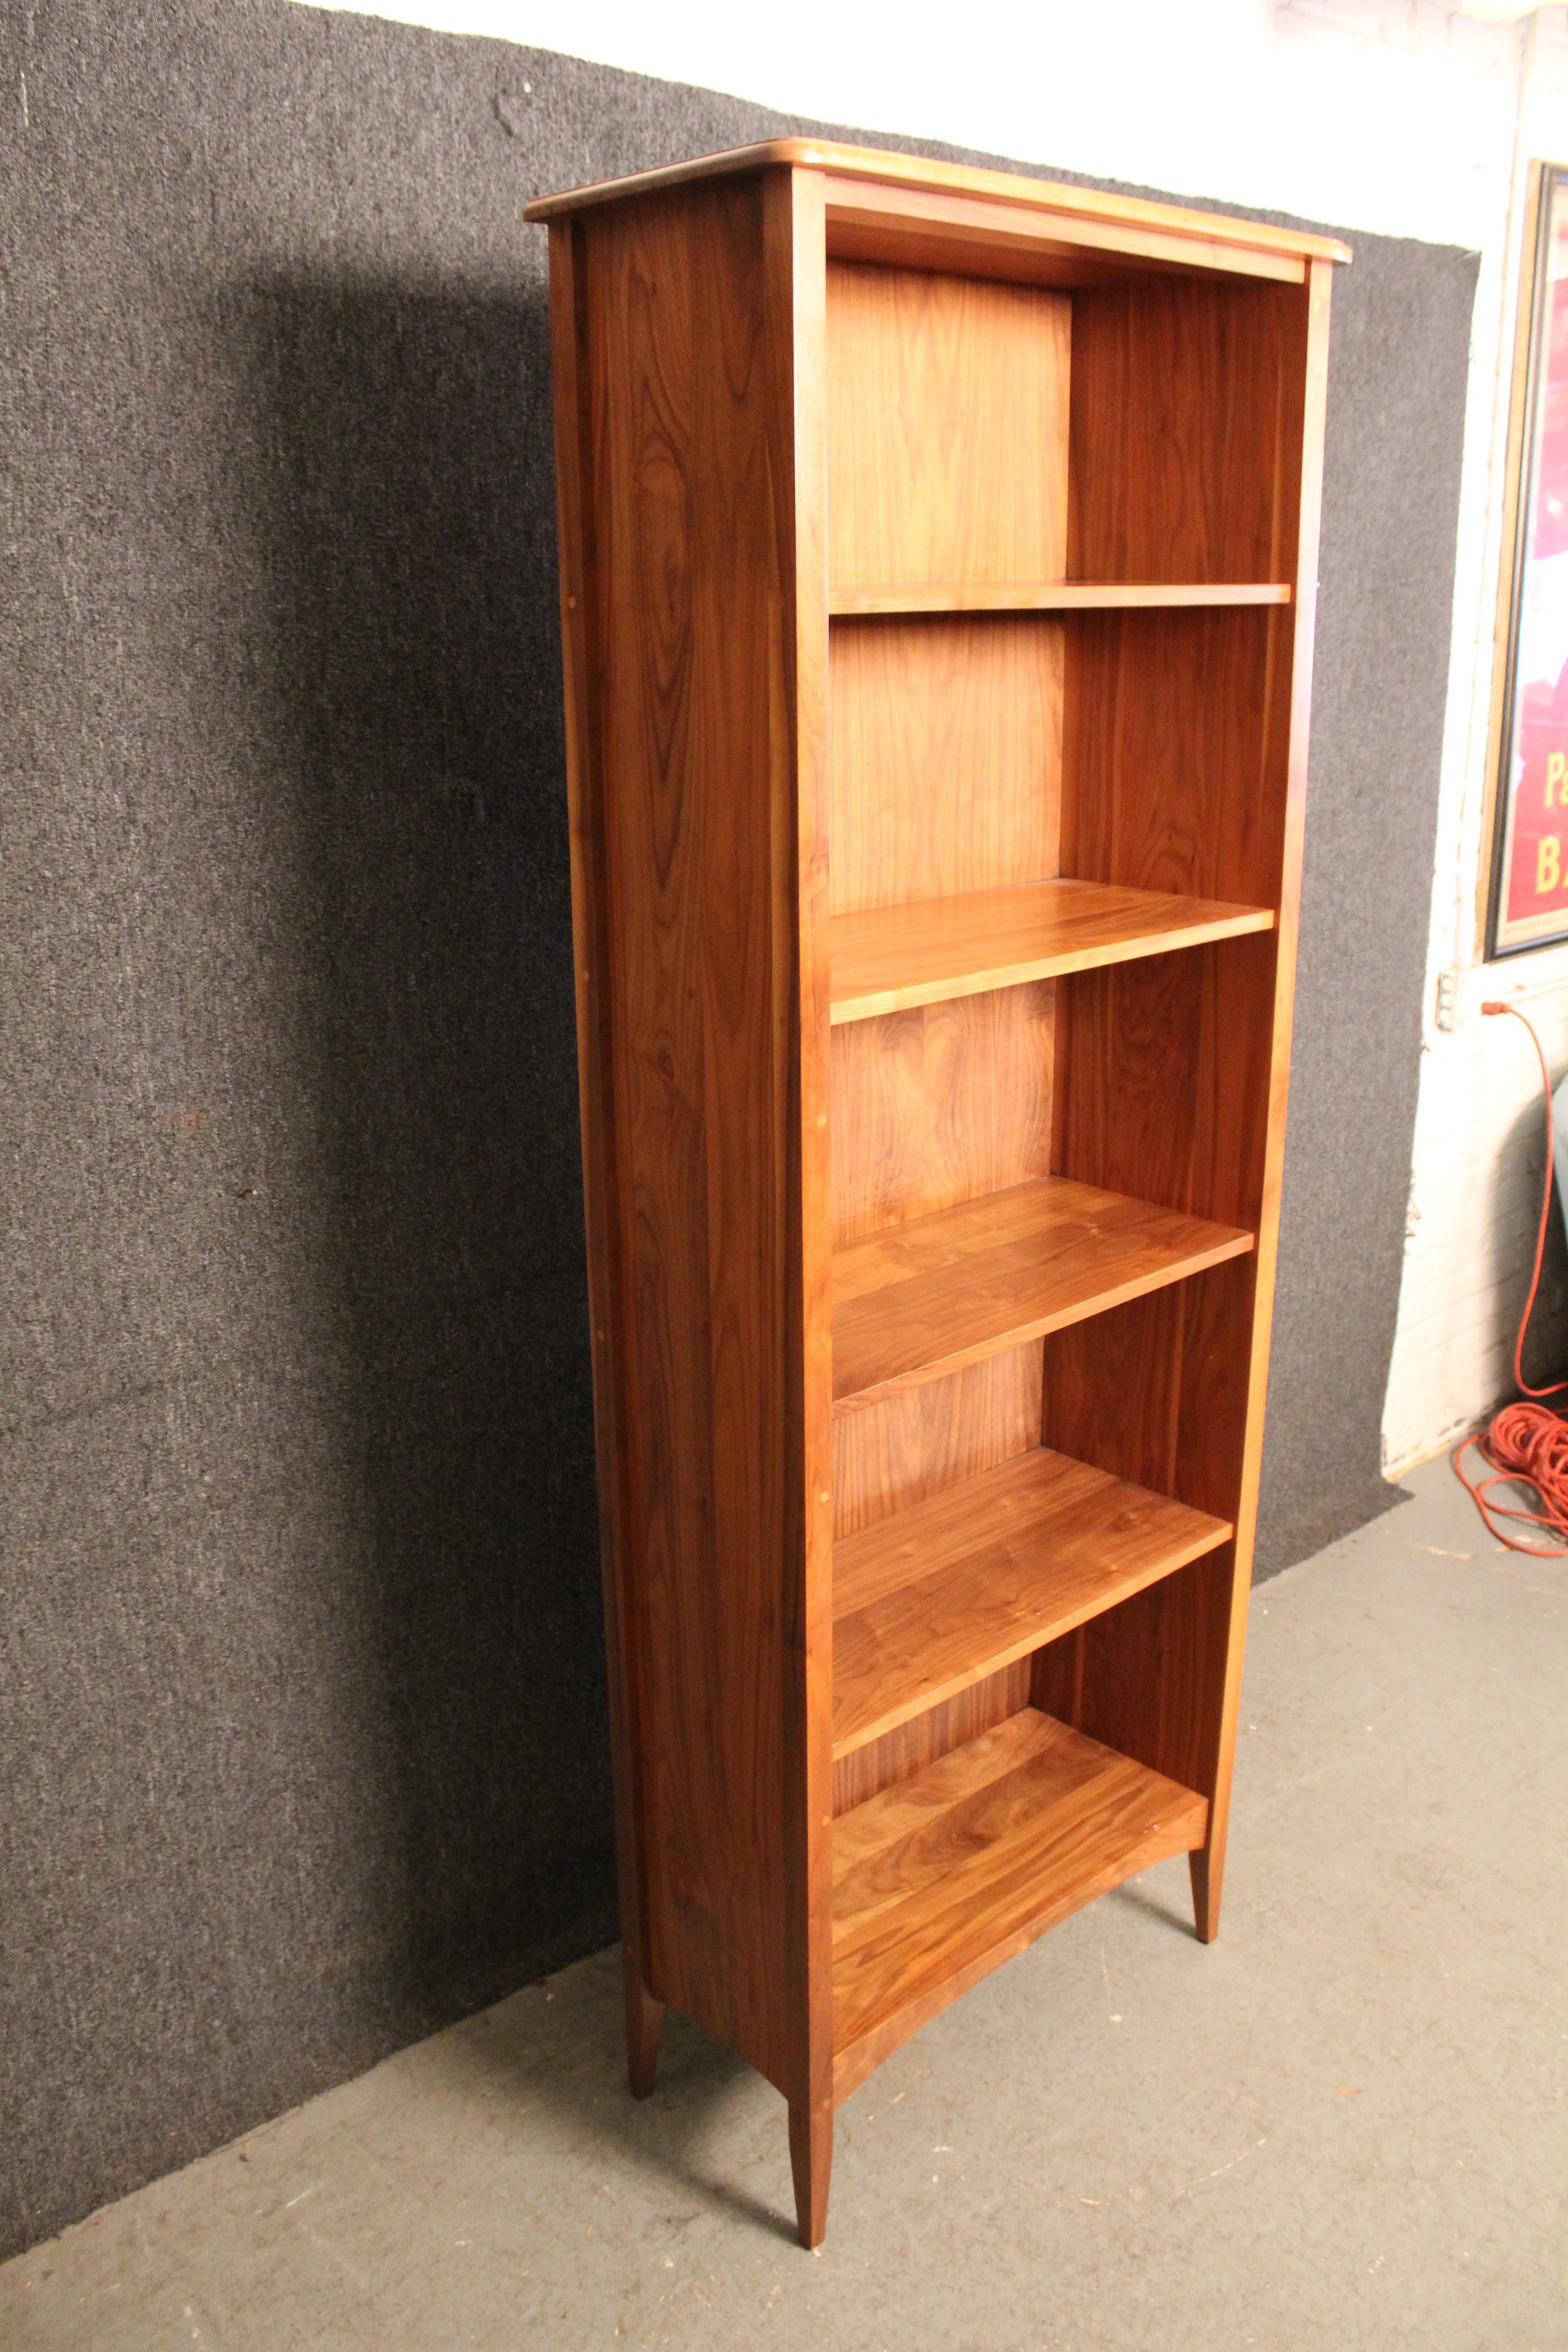 Beautifully handcrafted solid wood bookcase from the talented craftsmen of Pompanoosuc Mills Furniture of 21st-Century Vermont. A pillar of their popular, Shaker-inspired 